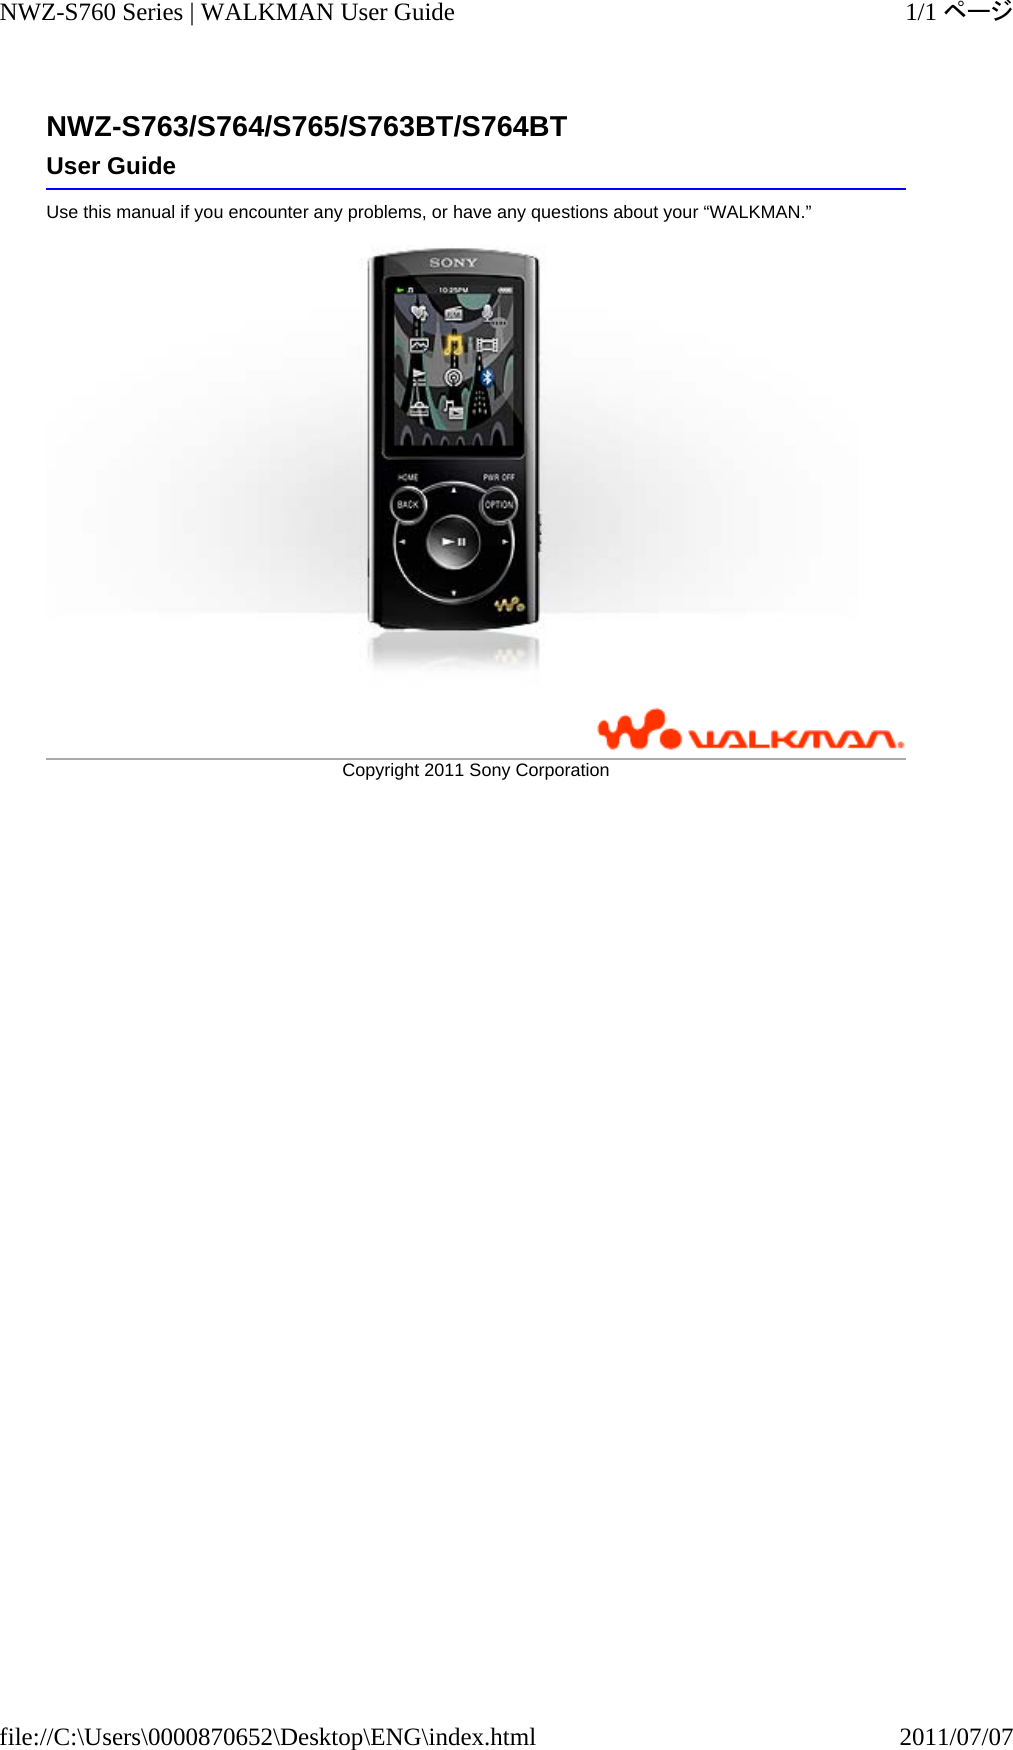 NWZ-S763/S764/S765/S763BT/S764BTUse this manual if you encounter any problems, or have any questions about your “WALKMAN.”  User GuideCopyright 2011 SonyCorporation1/1ページNWZ-S760 Series | WALKMAN User Guide2011/07/07file://C:\Users\0000870652\Desktop\ENG\index.html